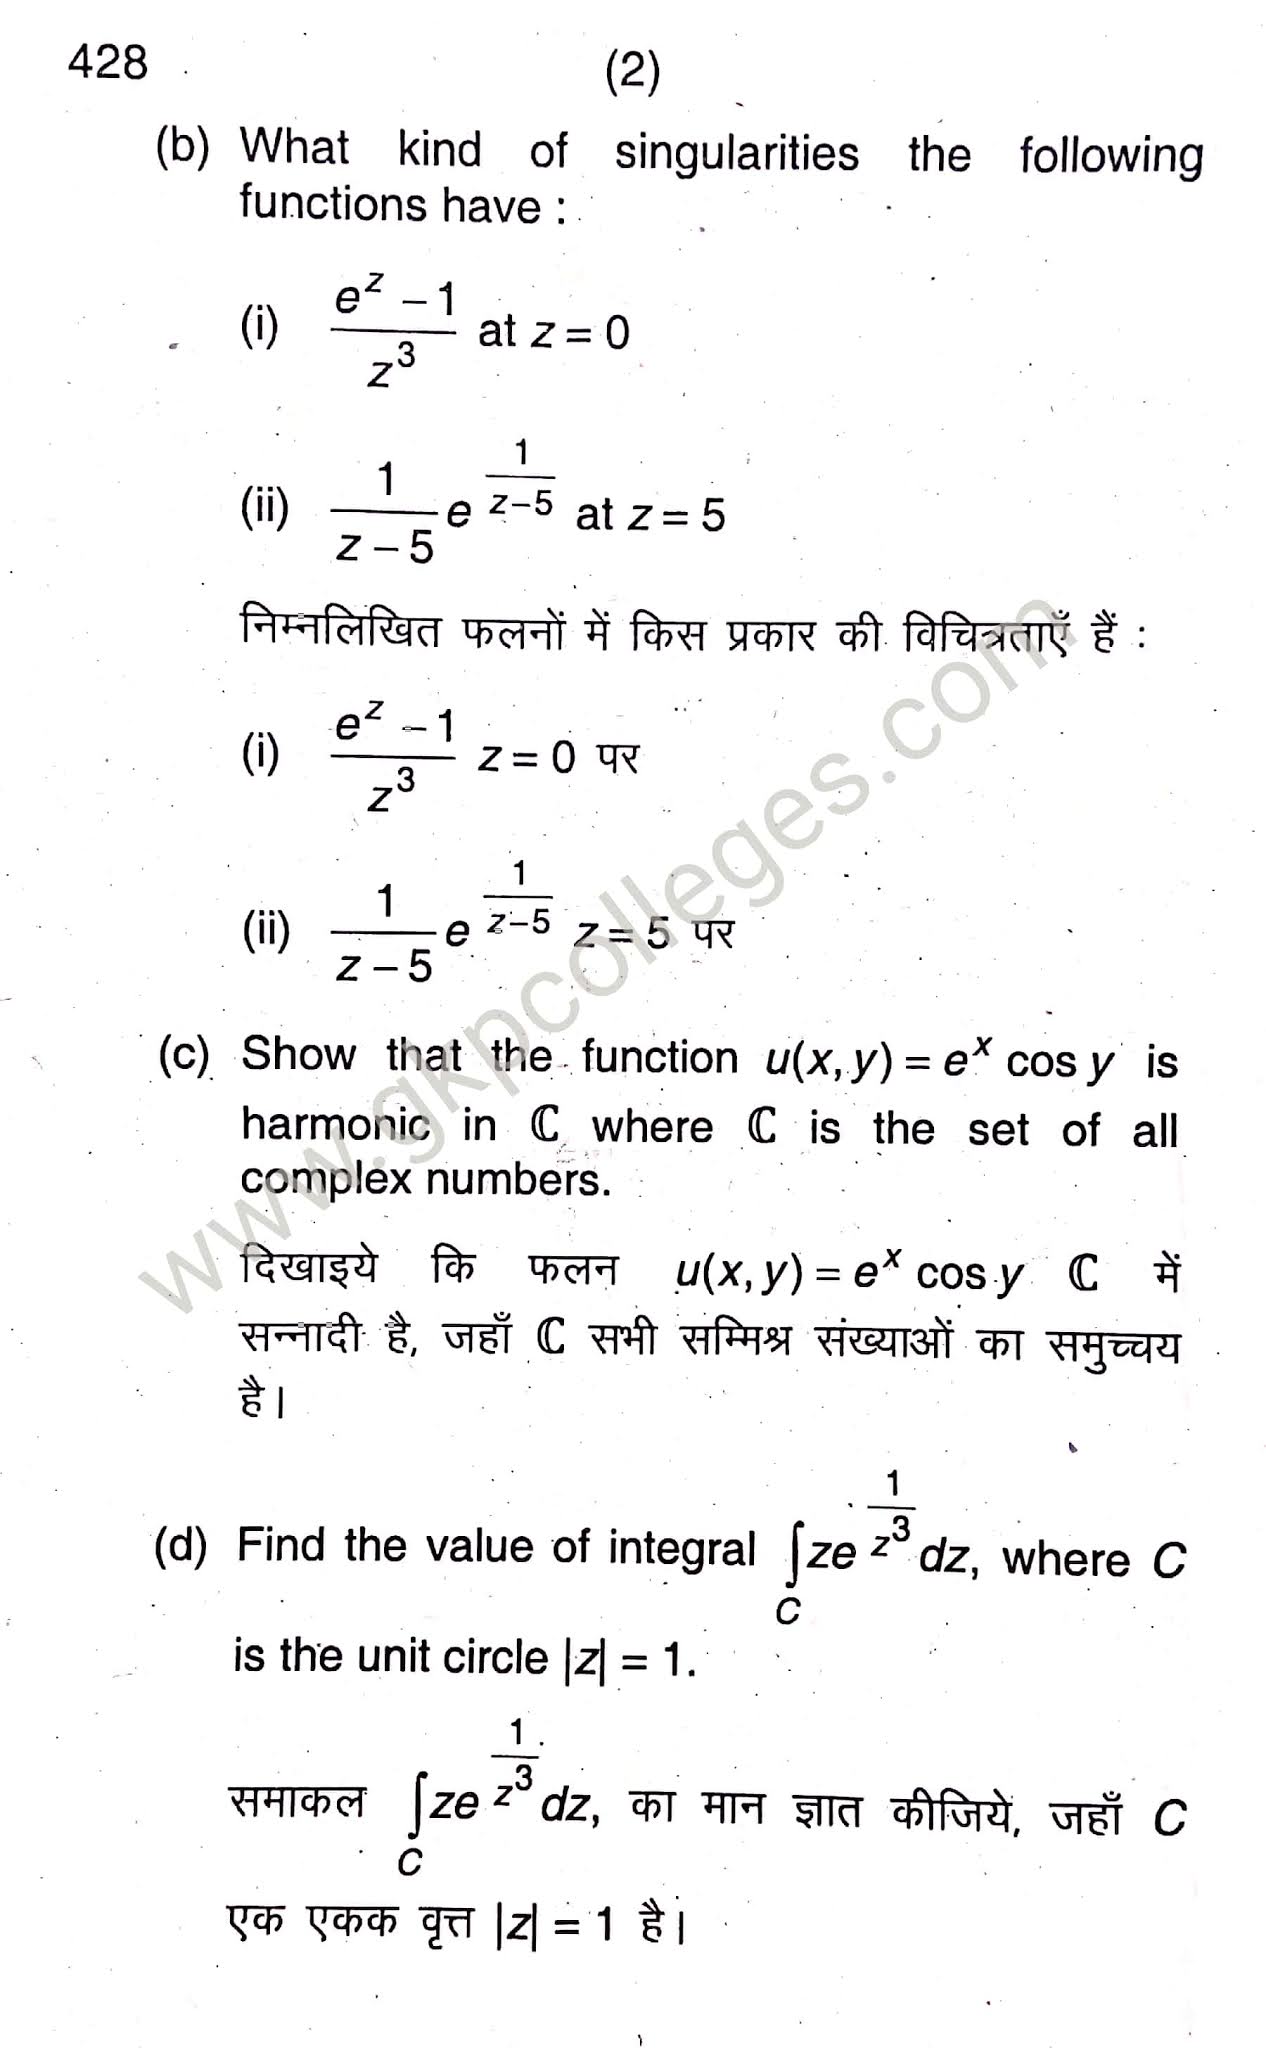 Complex Analysis and Calculus of Variations, Mathematics Paper- 2nd for B.Sc. 3rd year students, DDU Gorakhpur University Examination 2020